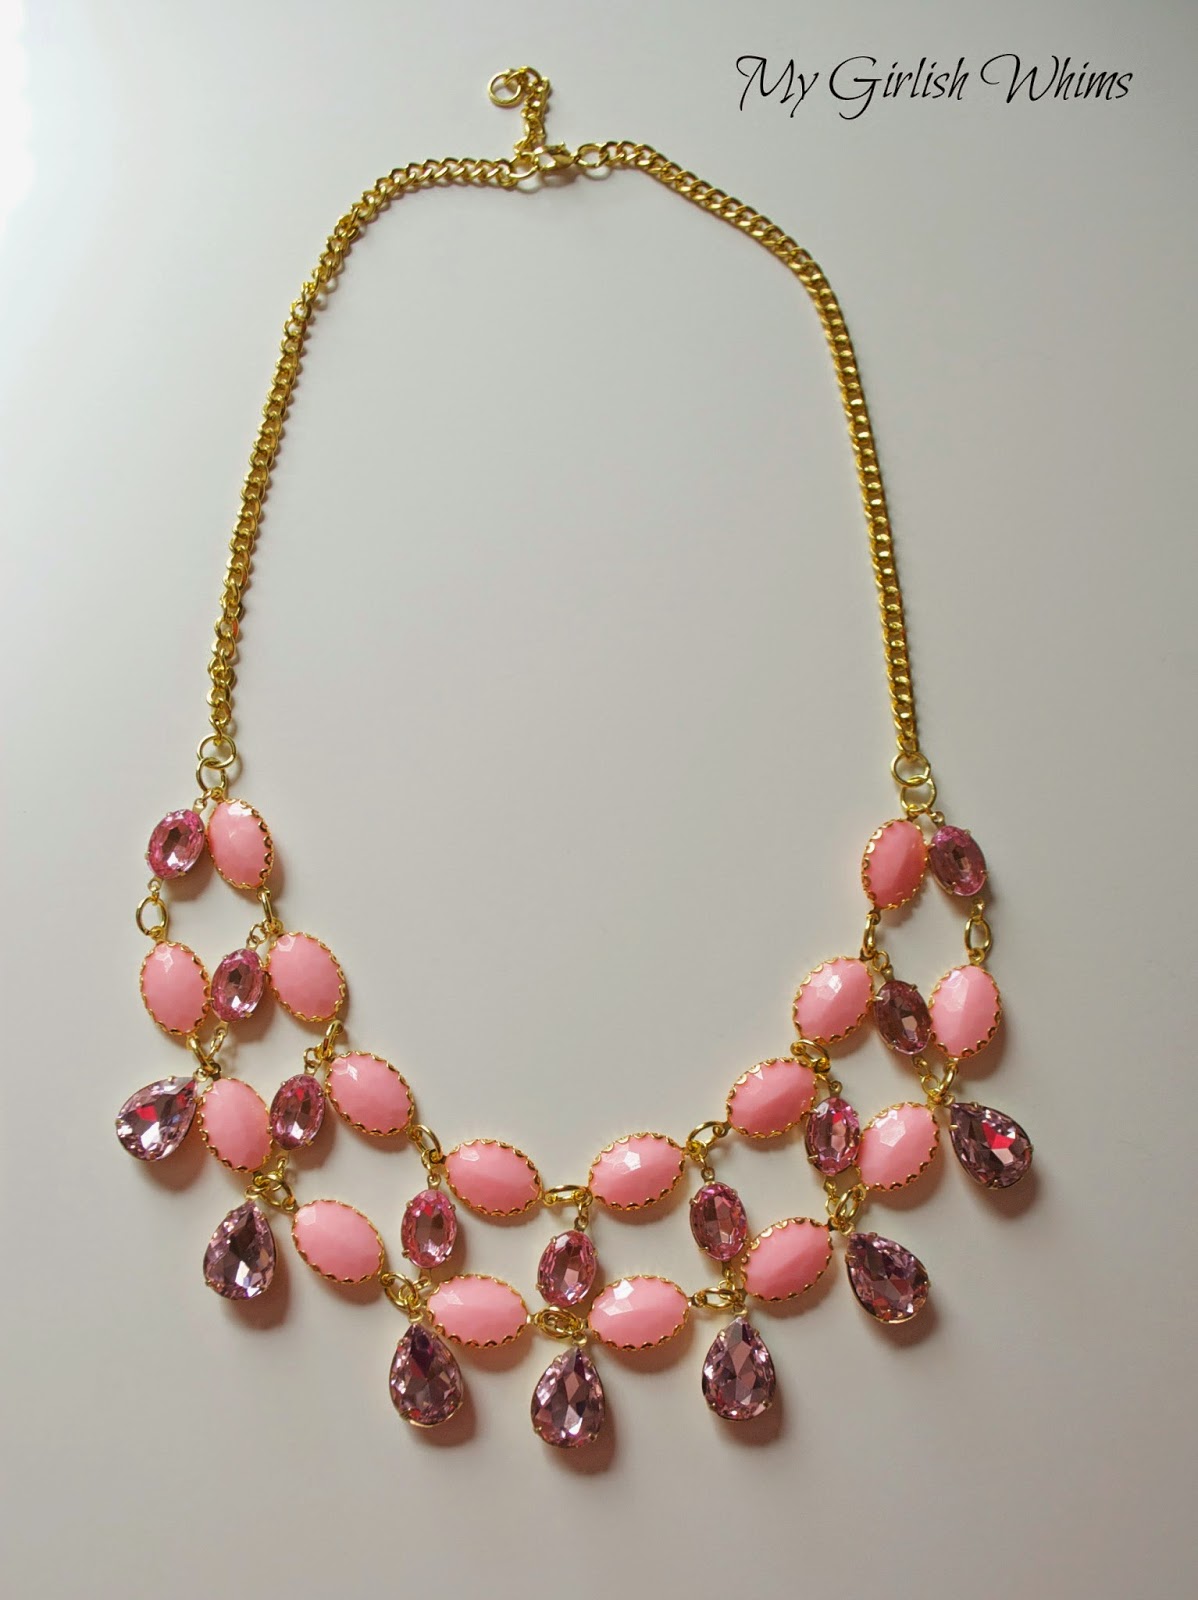 DIY Pink Crystal Statement Necklace - My Girlish Whims